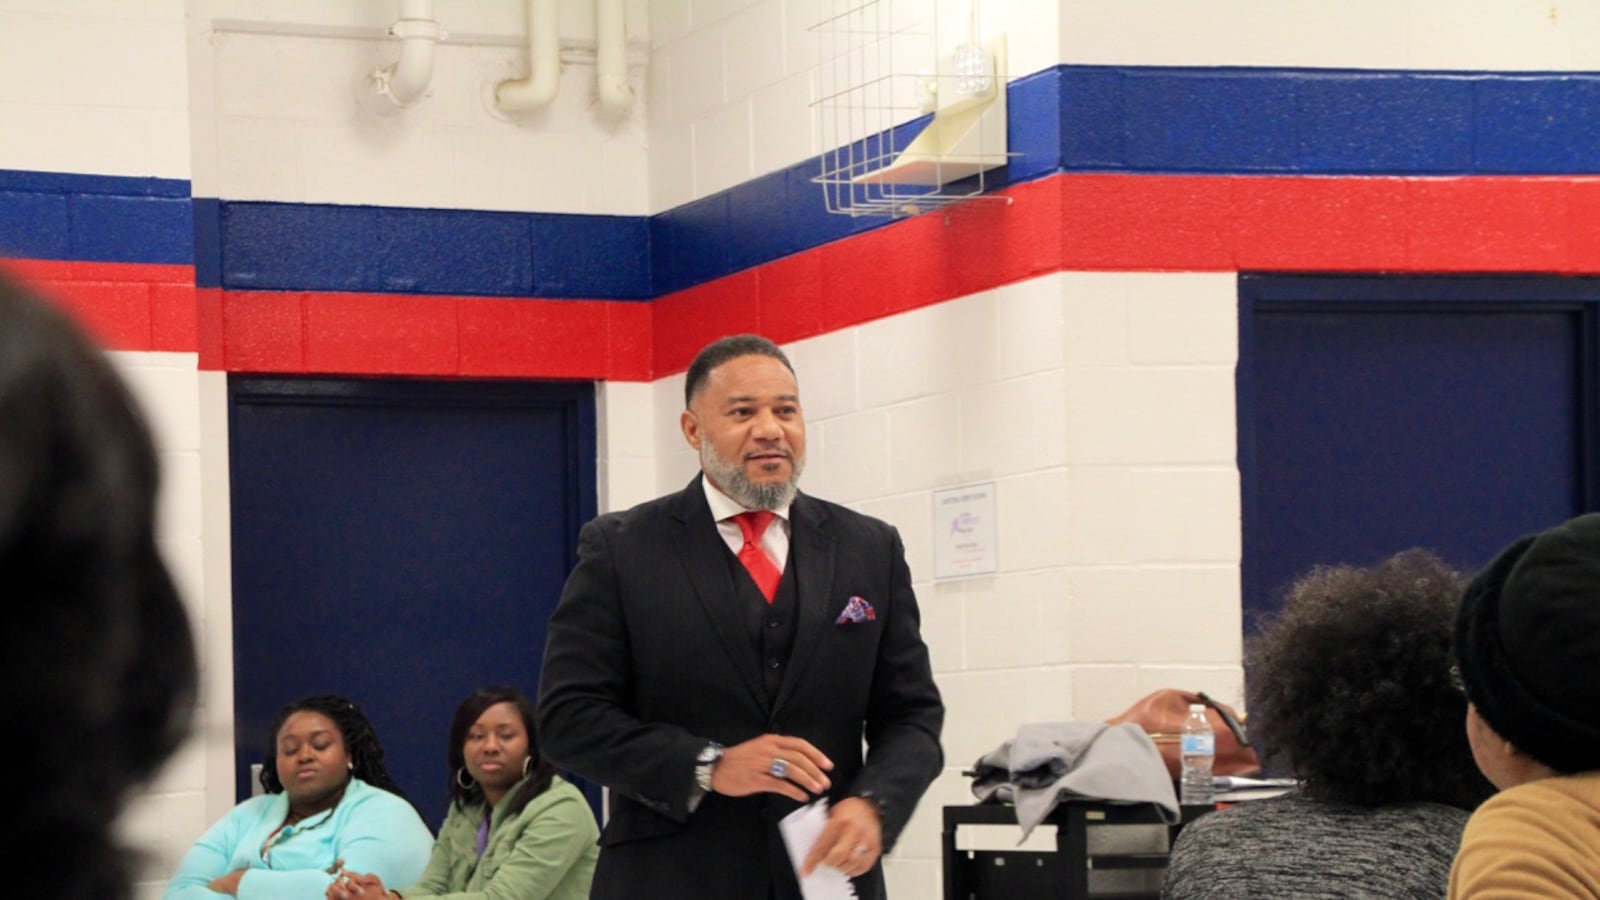 Bobby White, who founded Frayser Community Schools in 2014, speaks to community members at Westside Middle.